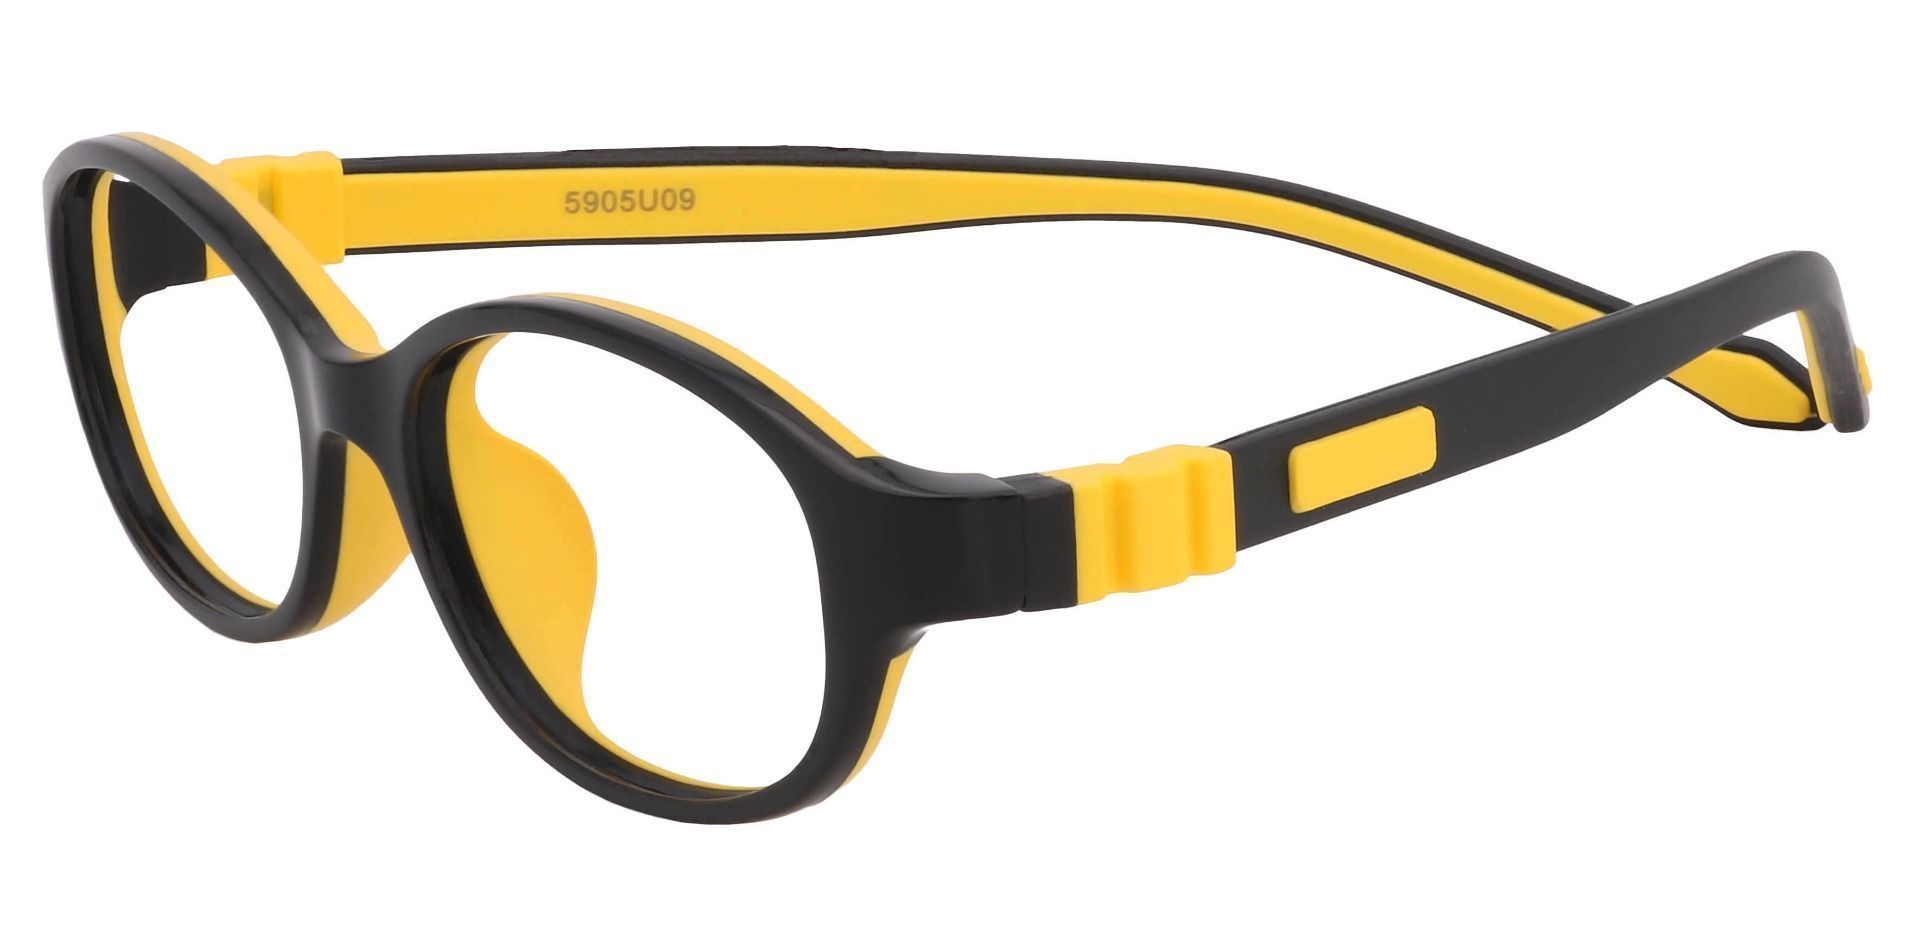 Stone Oval Non-Rx Glasses - The Frame Is Black And Yellow